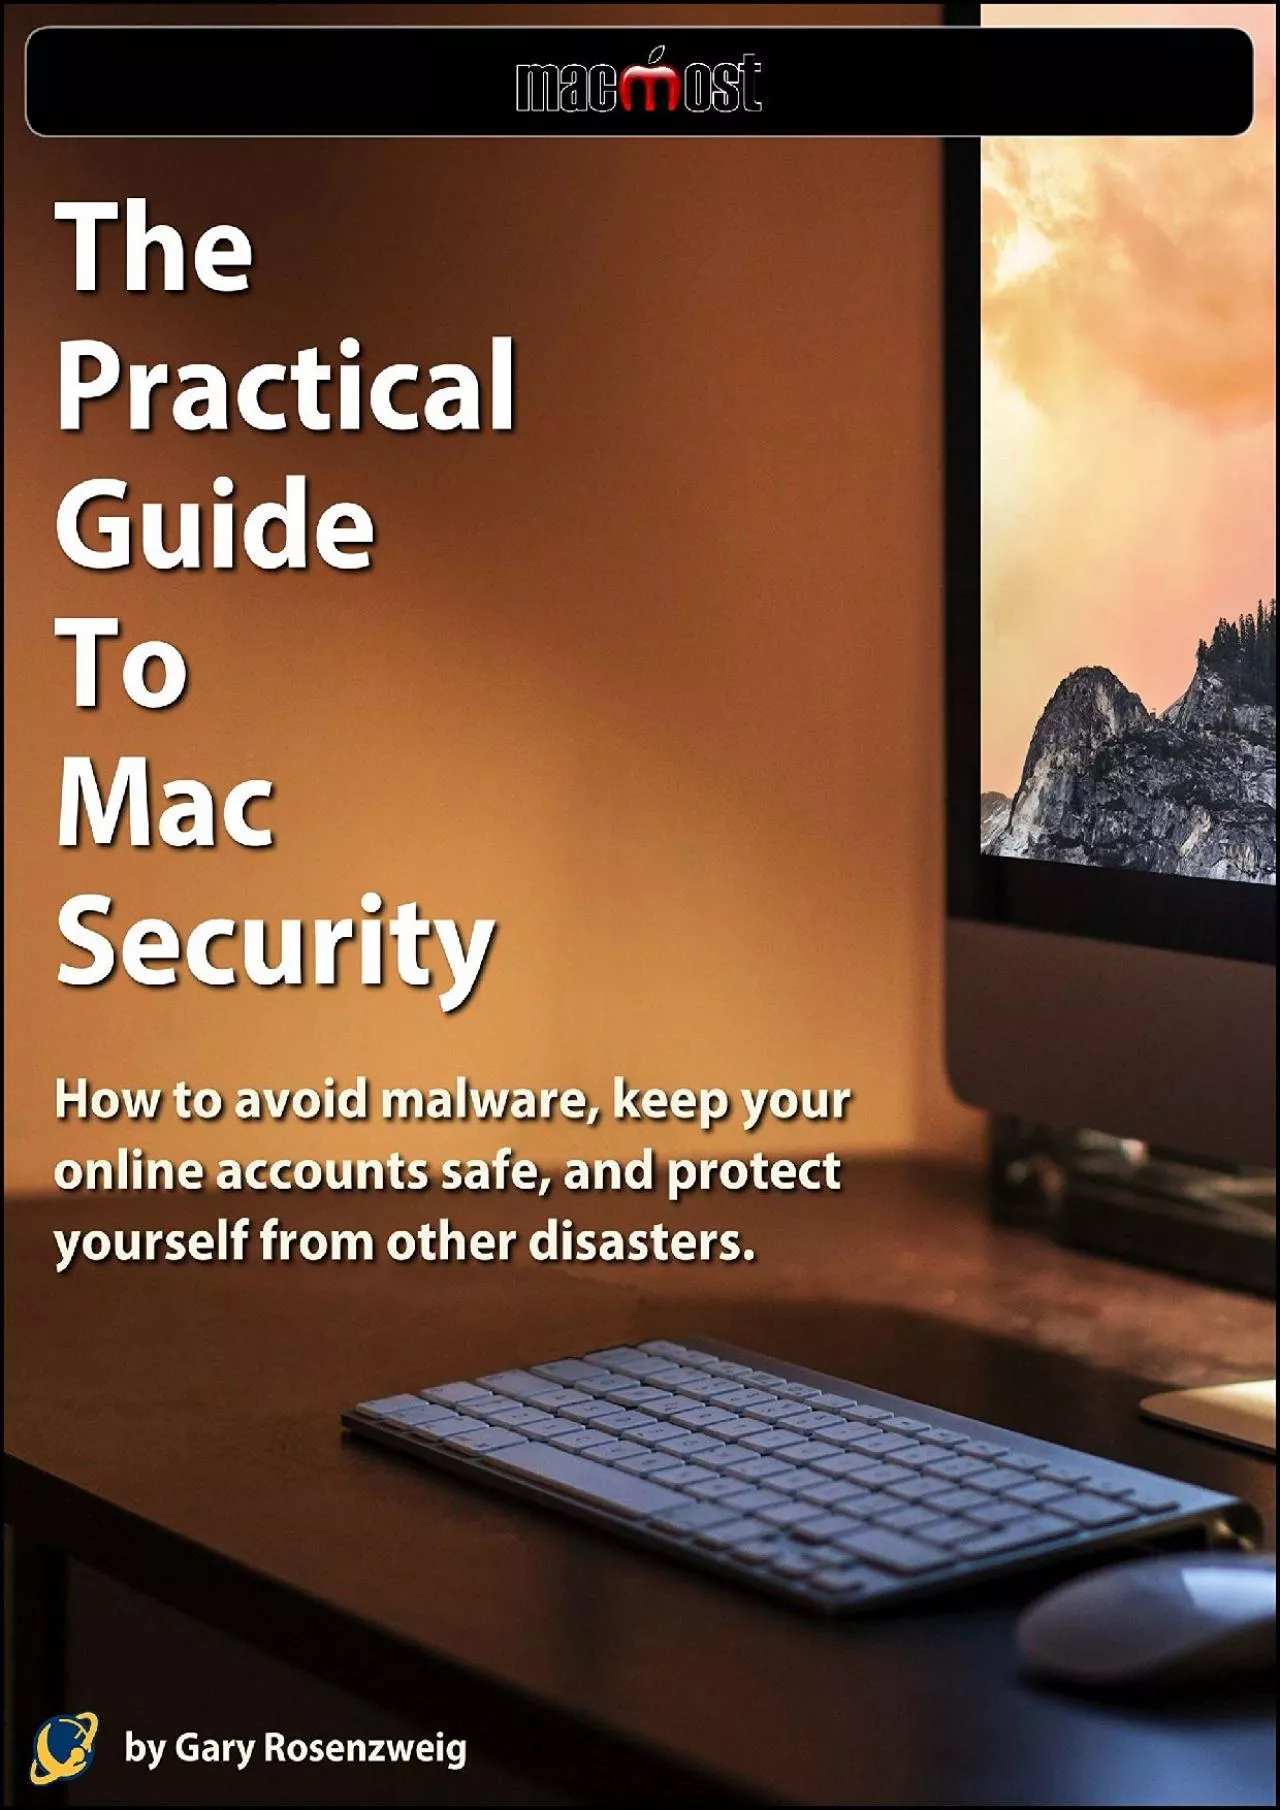 [PDF]-The Practical Guide To Mac Security: How to avoid malware, keep your online accounts